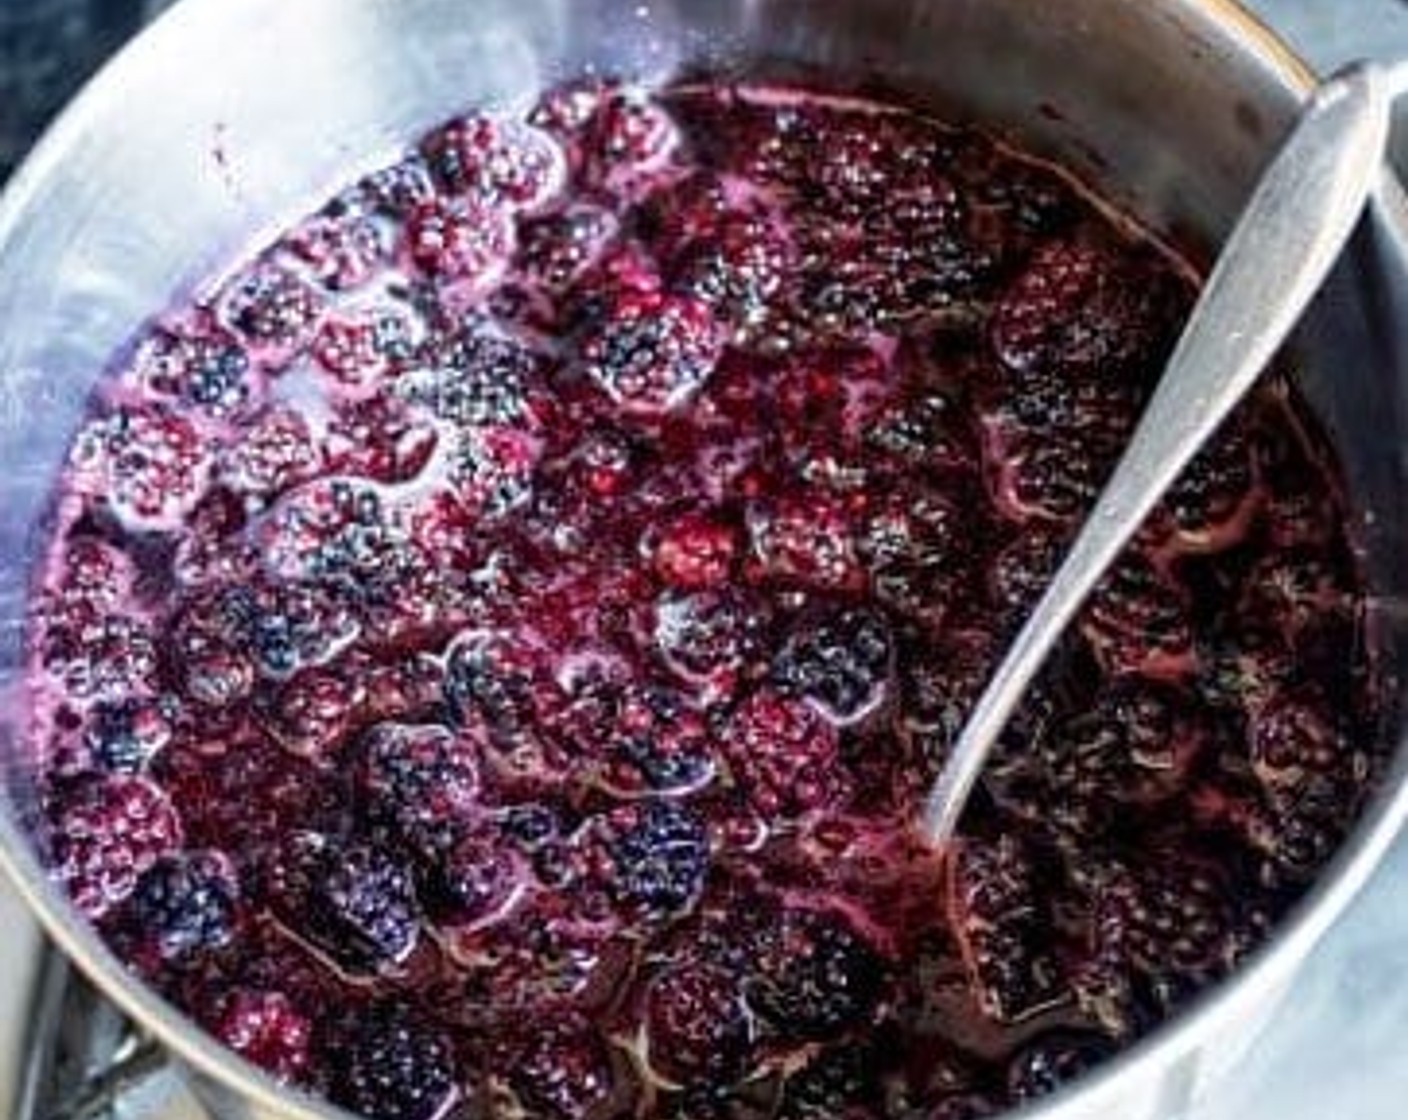 step 2 Place the saucepan on low heat for 3 minutes to gently warm up the blackberries without boiling. Stir often until the sugar has dissolved entirely and has developed a nice deep blackberry flavor to the juice.